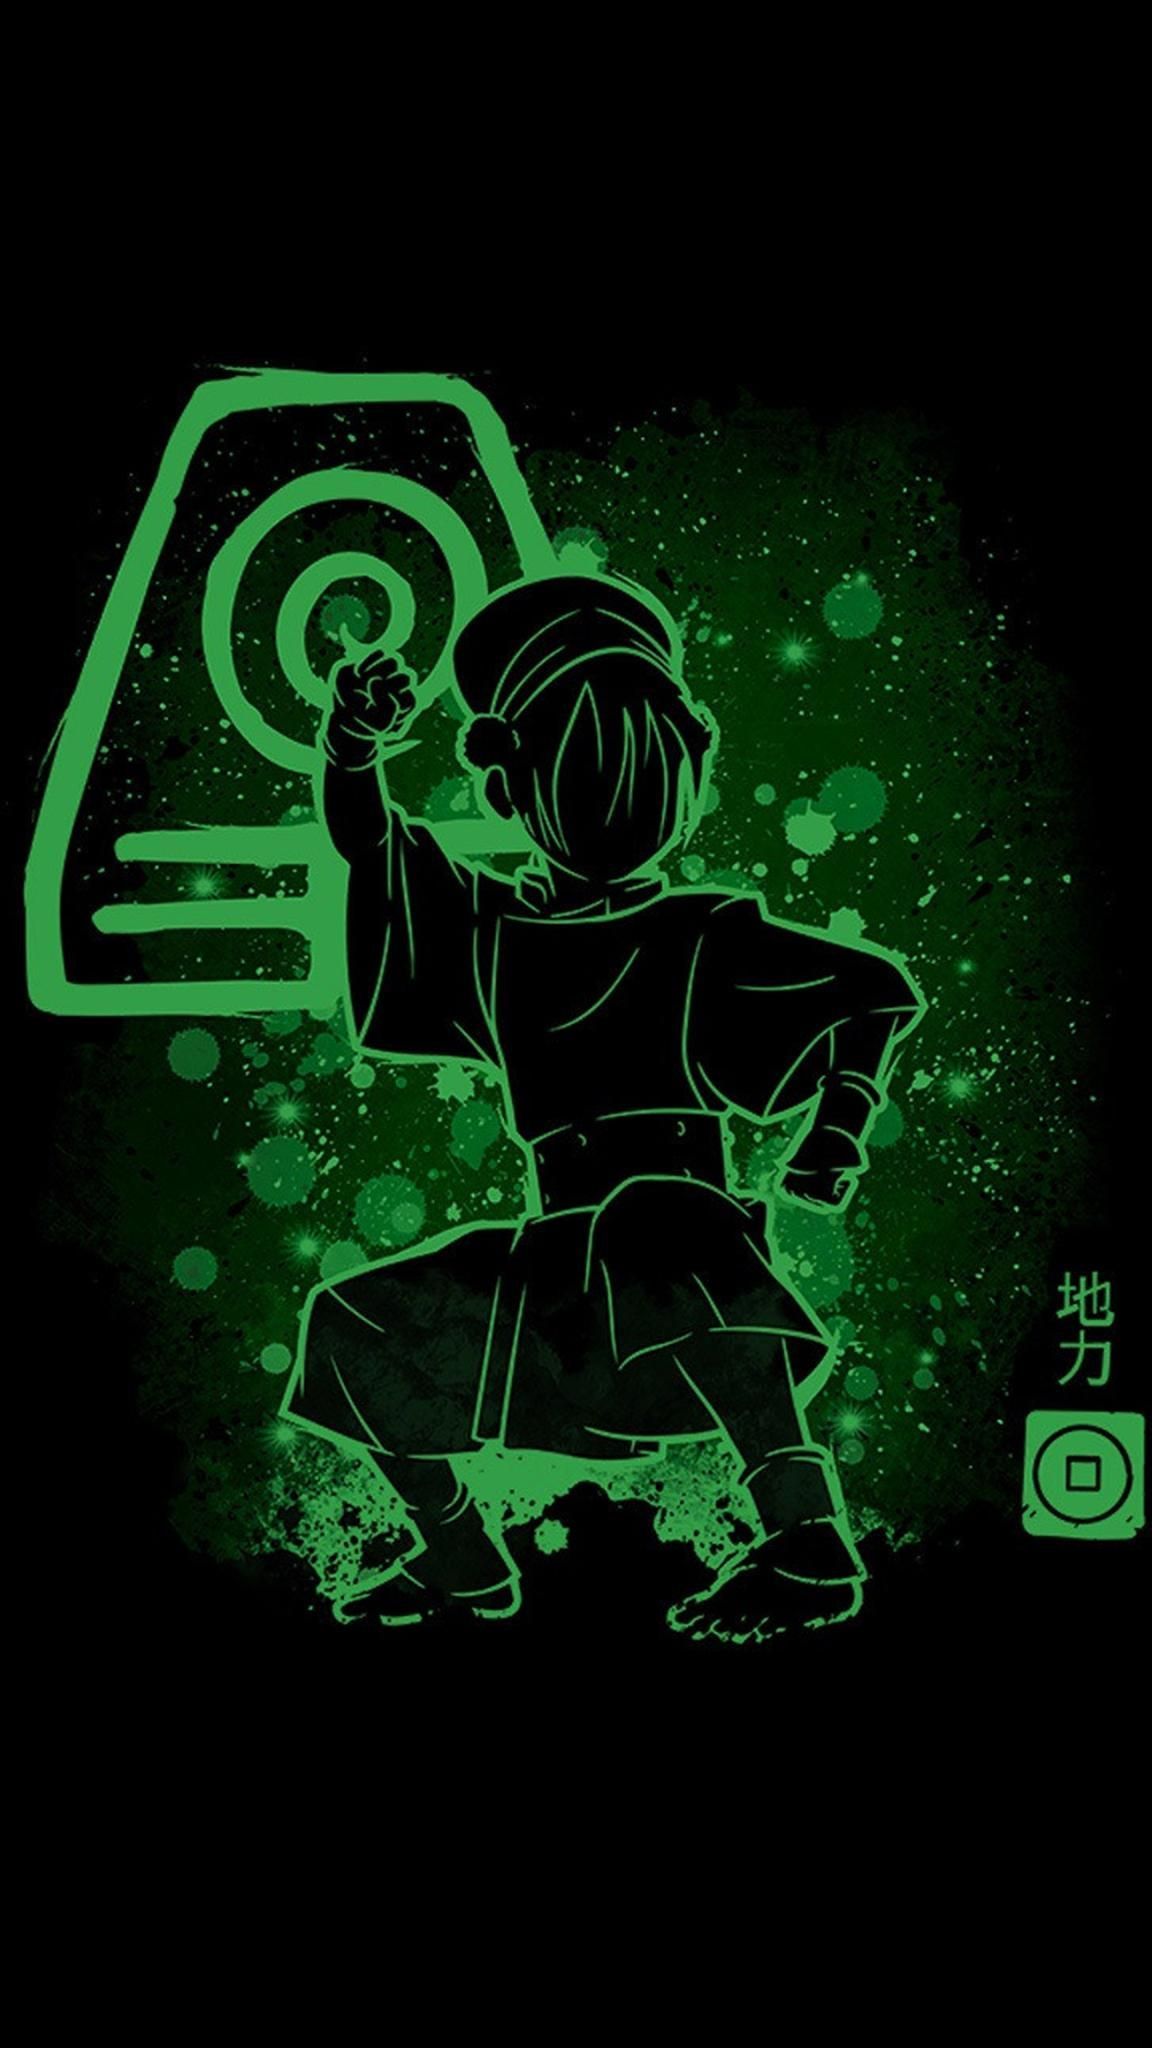 Earth Bender [1152x2048] (i.redd.it) Submitted By -salamander- To R Amoledbackground 0 Comments O. Avatar Airbender, Avatar Picture, Avatar The Last Airbender